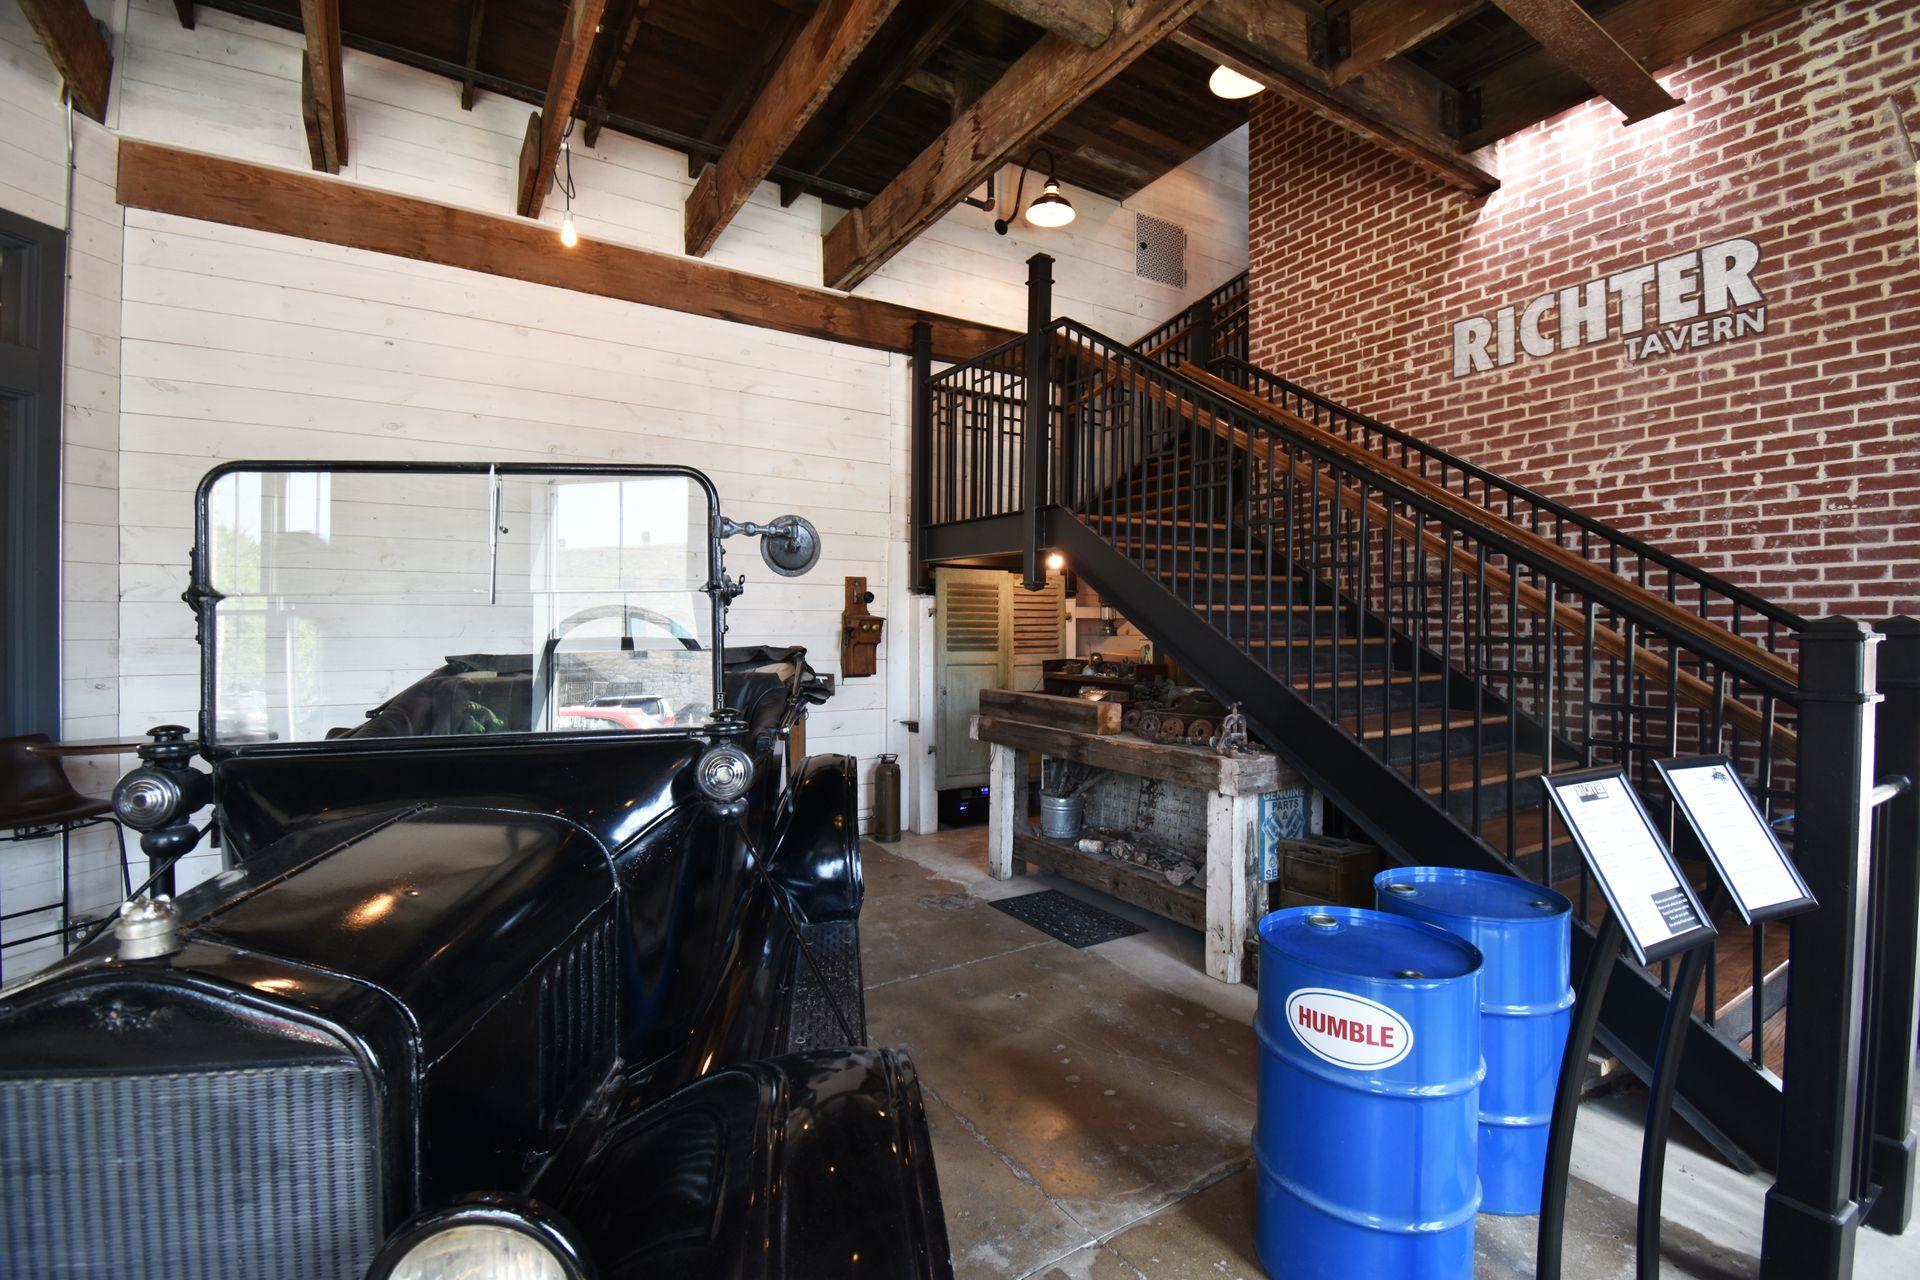 A vintage black car and a staircase leading up to the Richter Tavern.